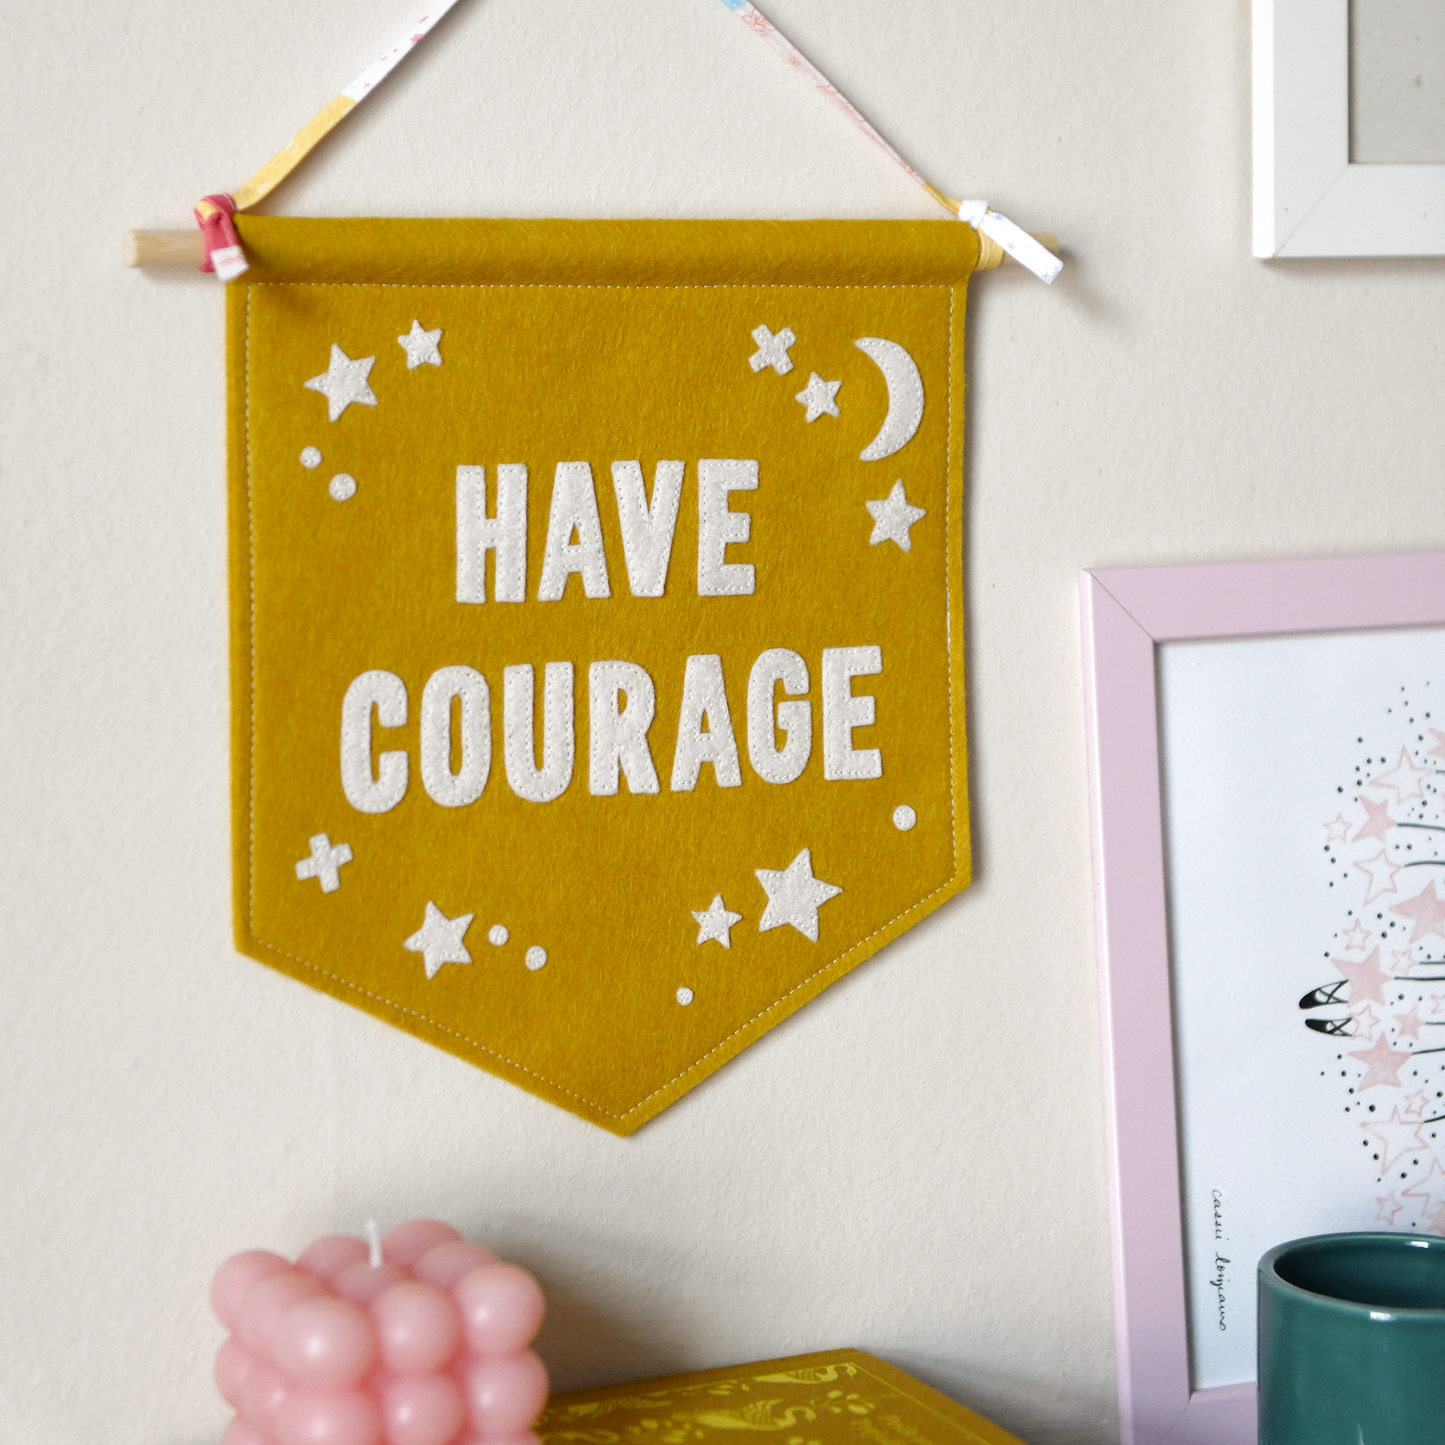 Have Courage positivity banner craft kit